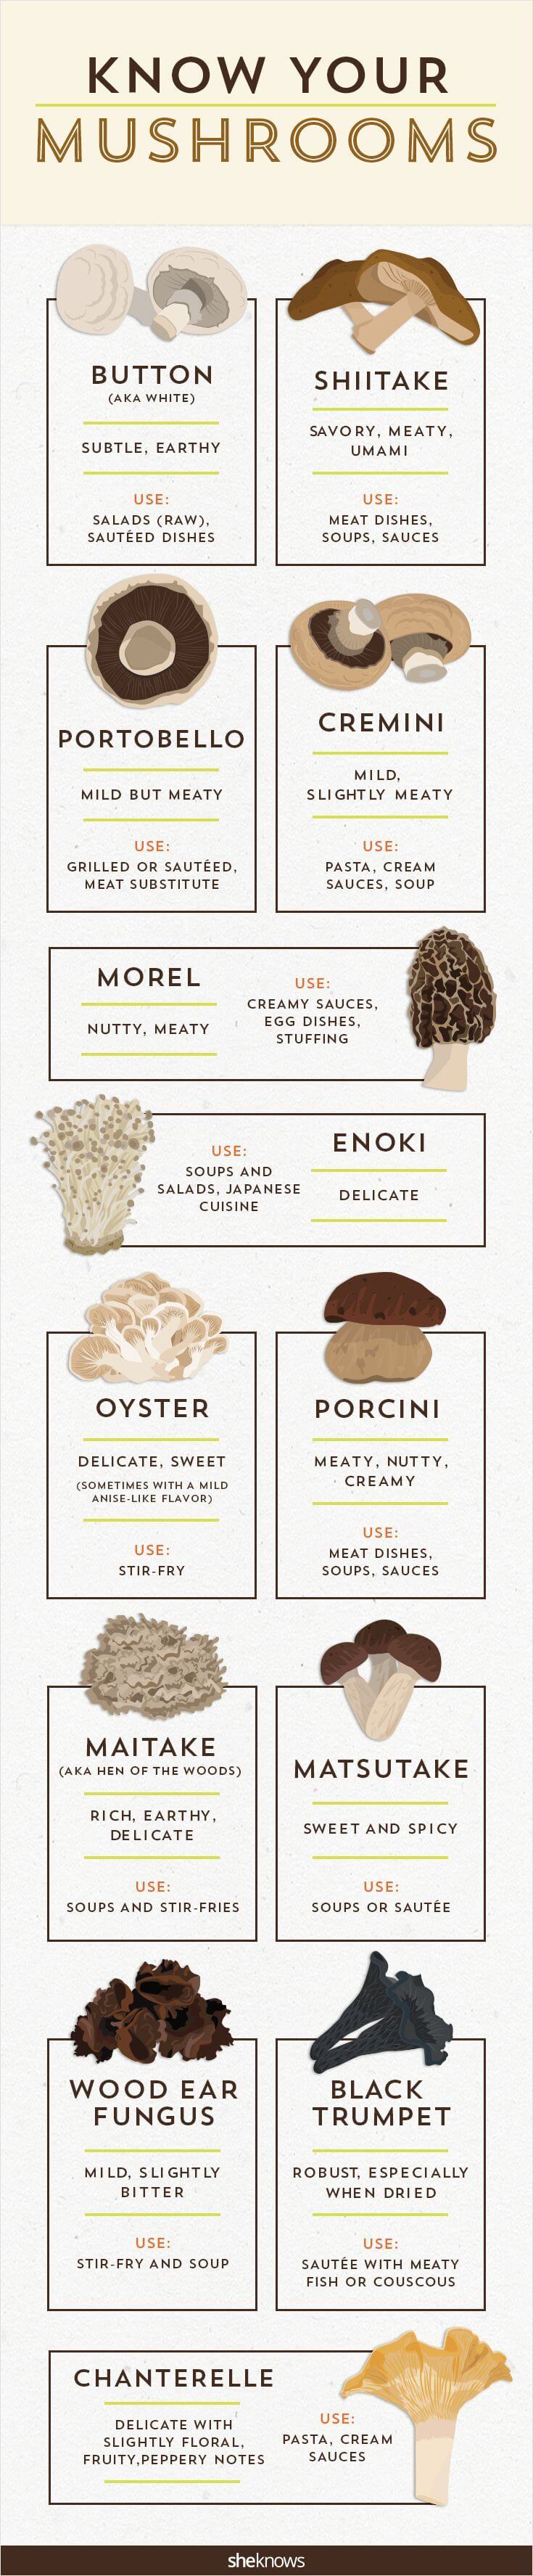 It's time to get your fungus knowledge down with this mushroom infographic